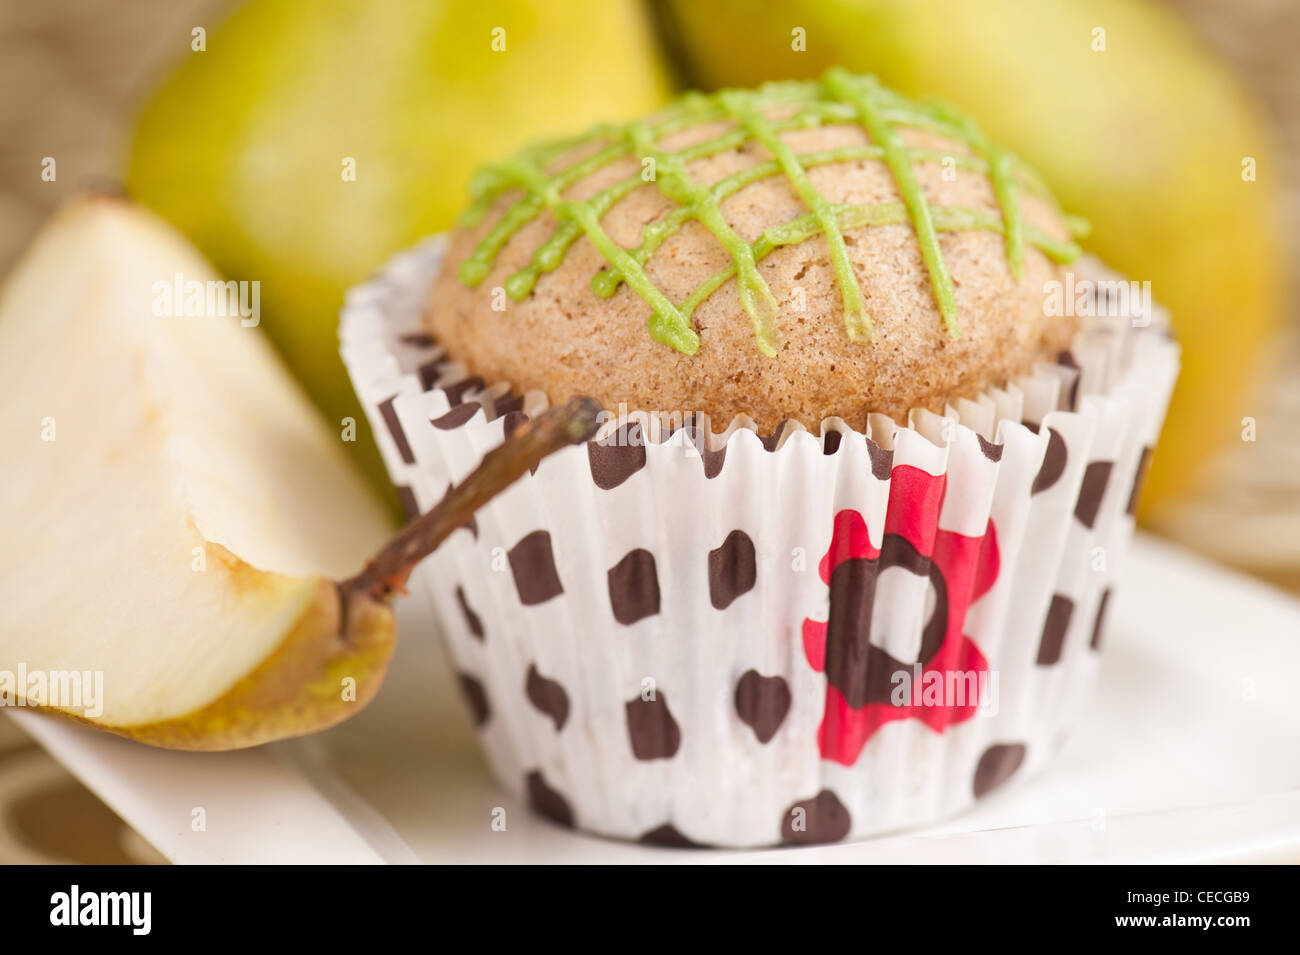 Pear muffin on white plate, selective focus Stock Photo